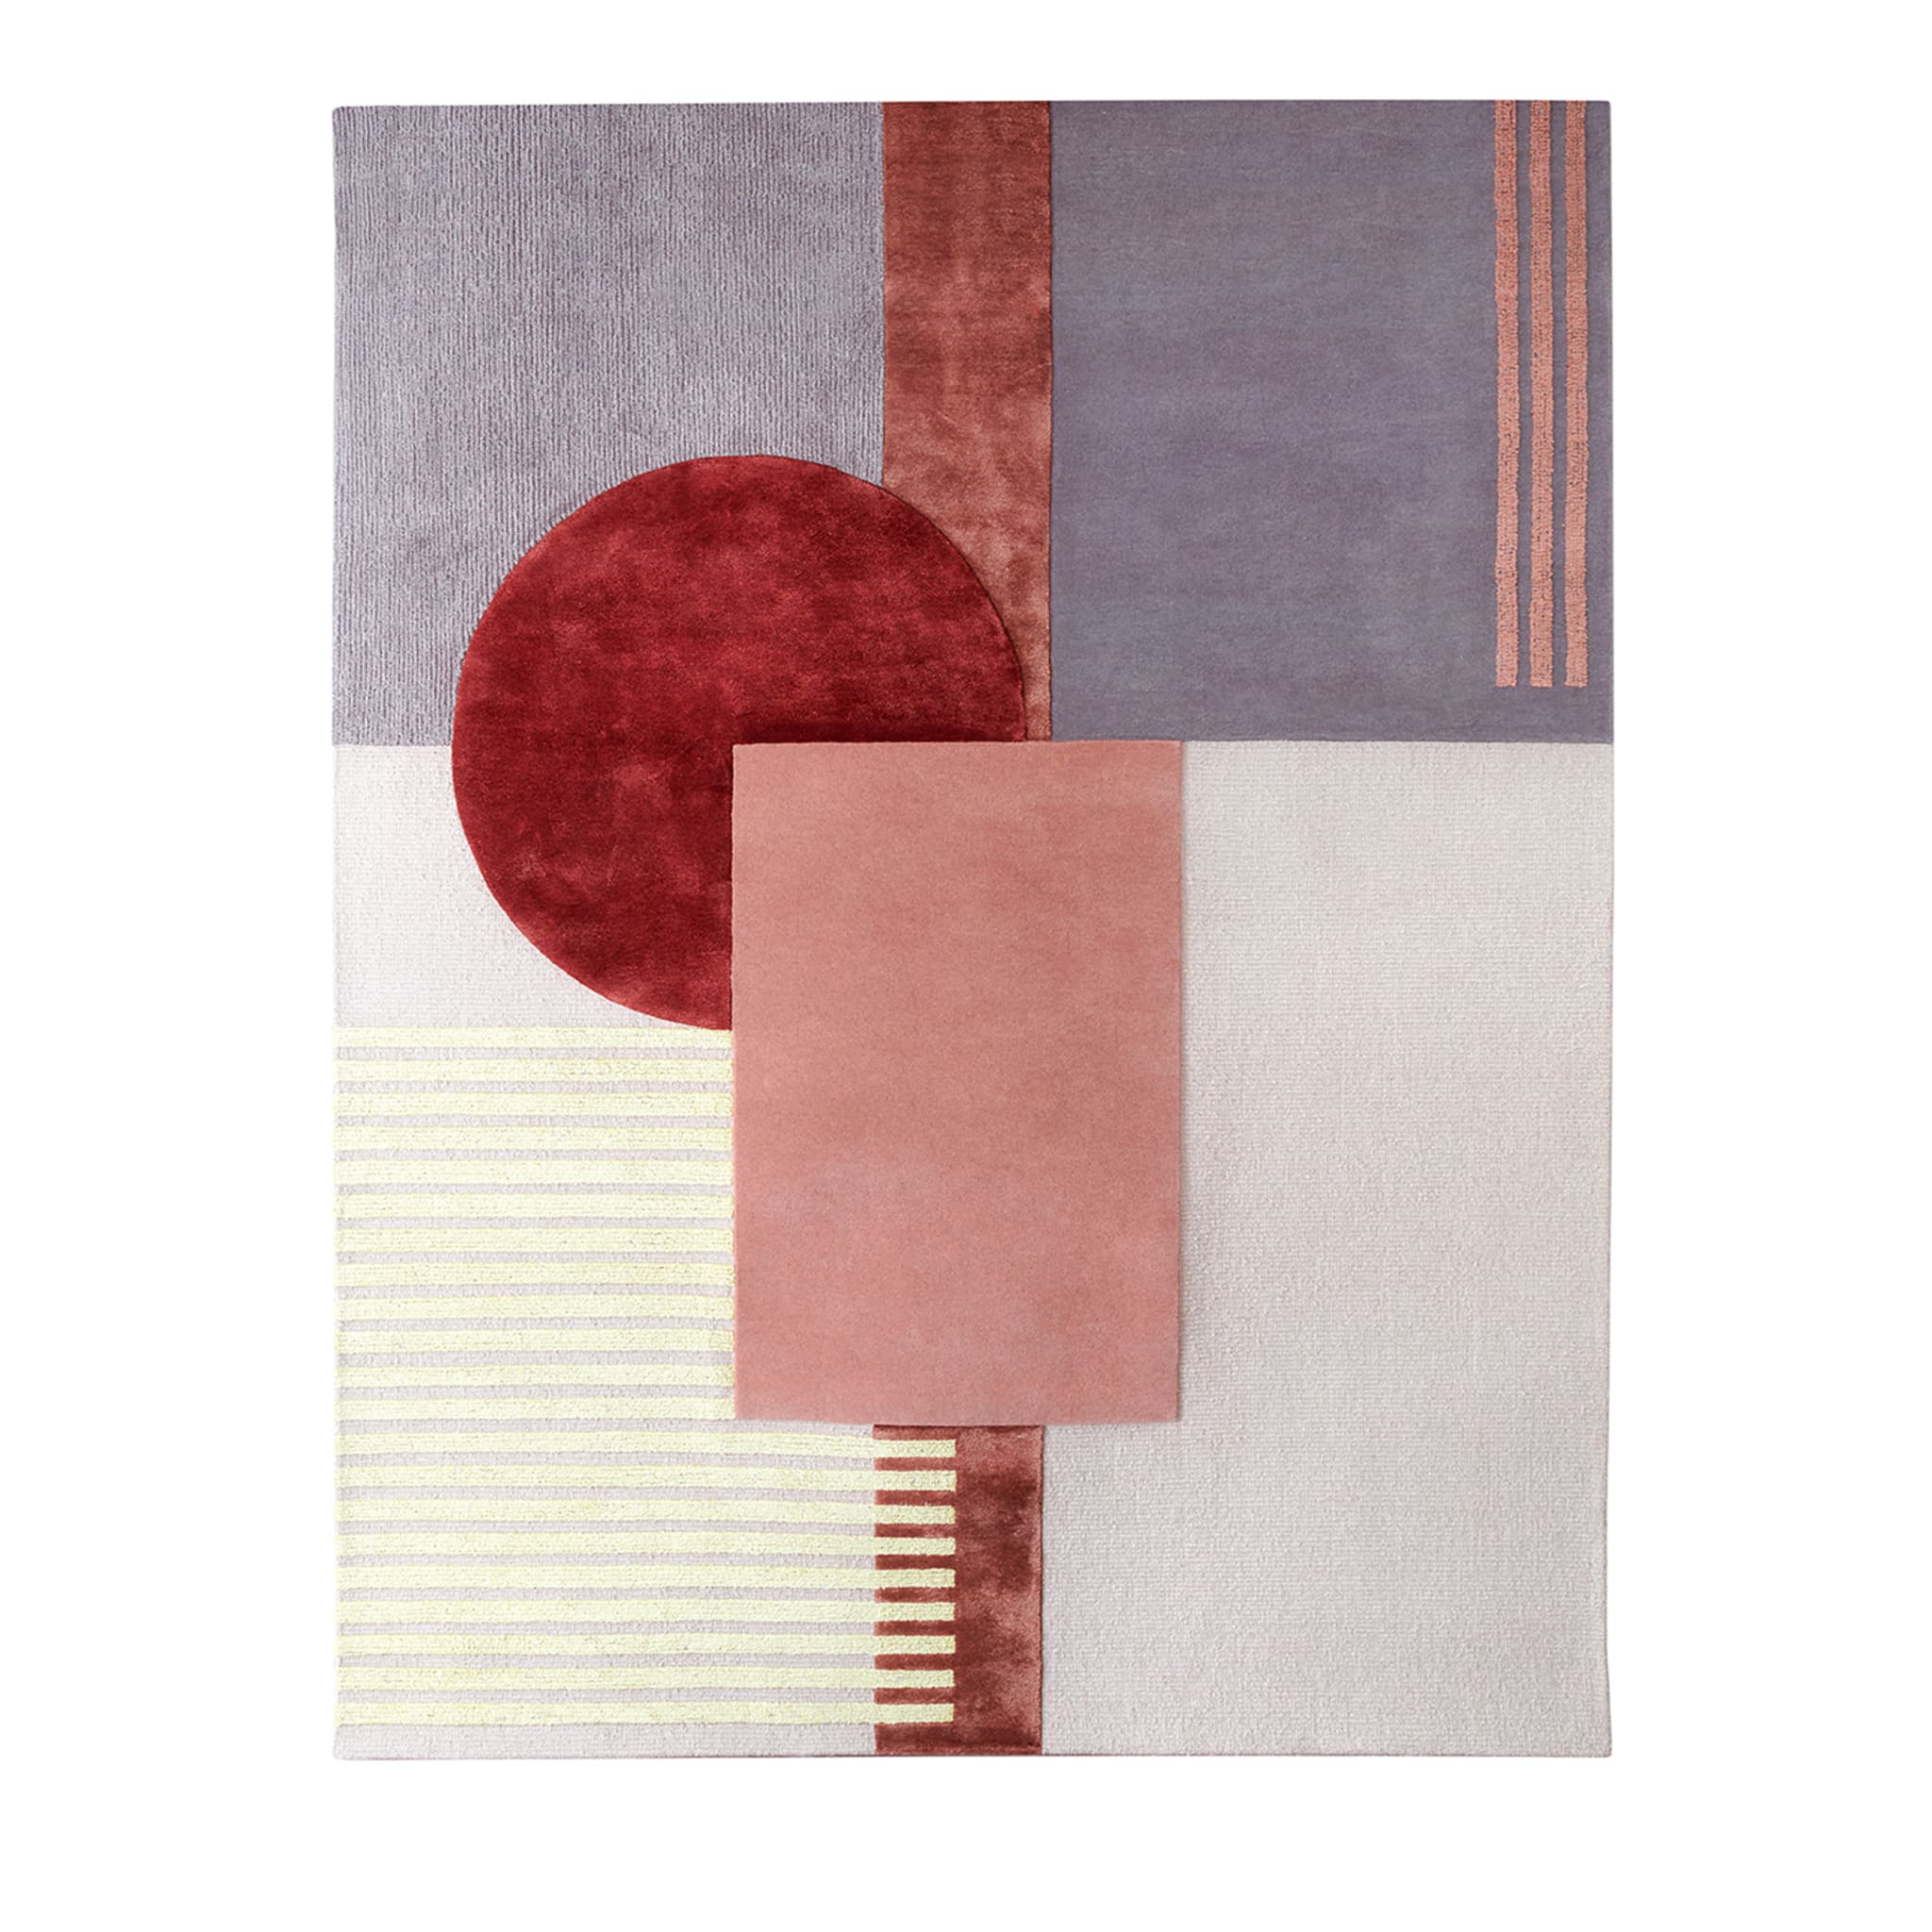 AROUND COLORS RUG PINK BY PAOLA PASTORINI - Main view